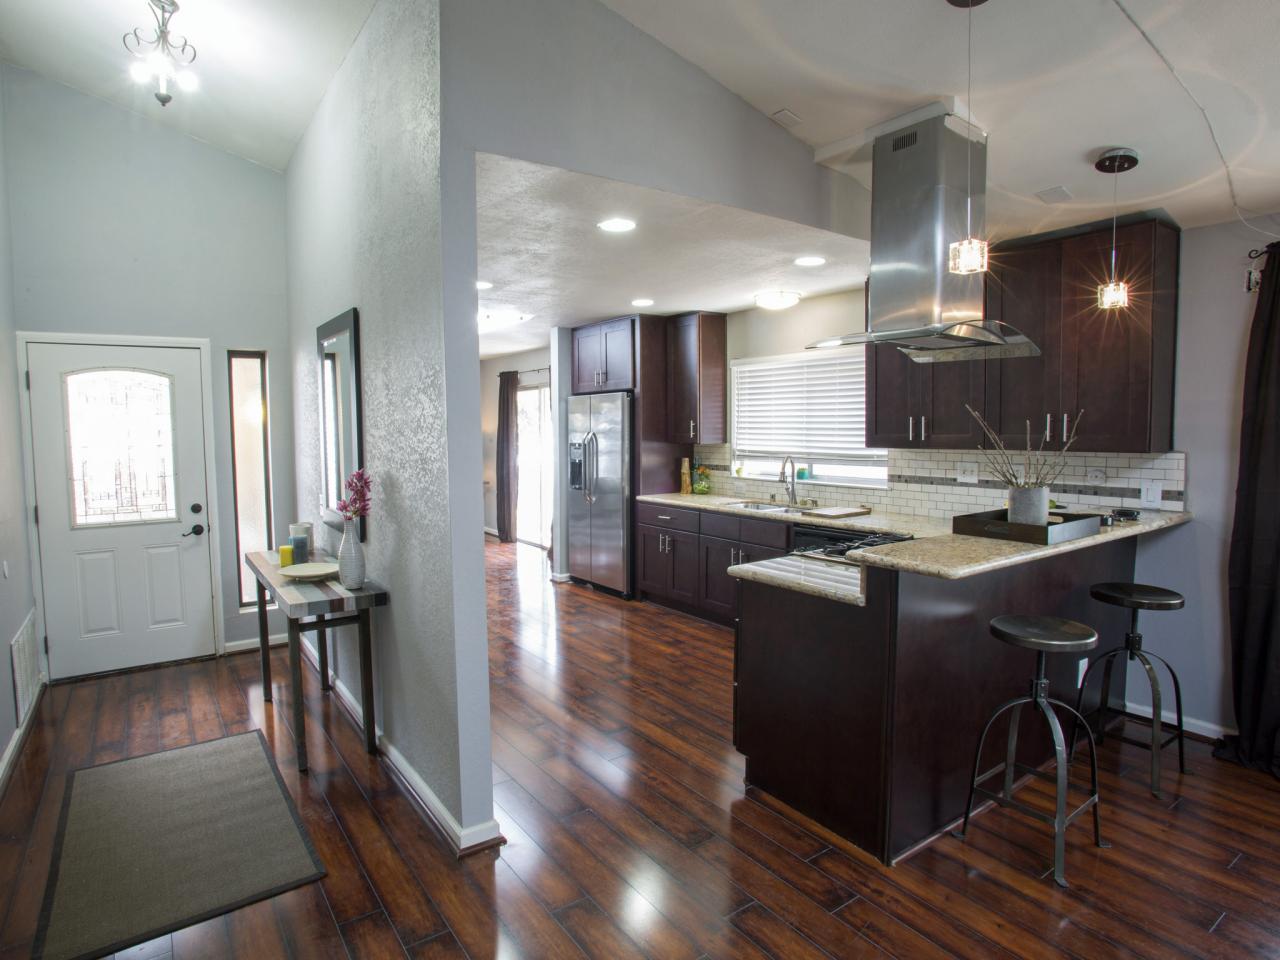 The Pros And Cons Of Laminate Flooring, Installing Laminate Flooring In Kitchen